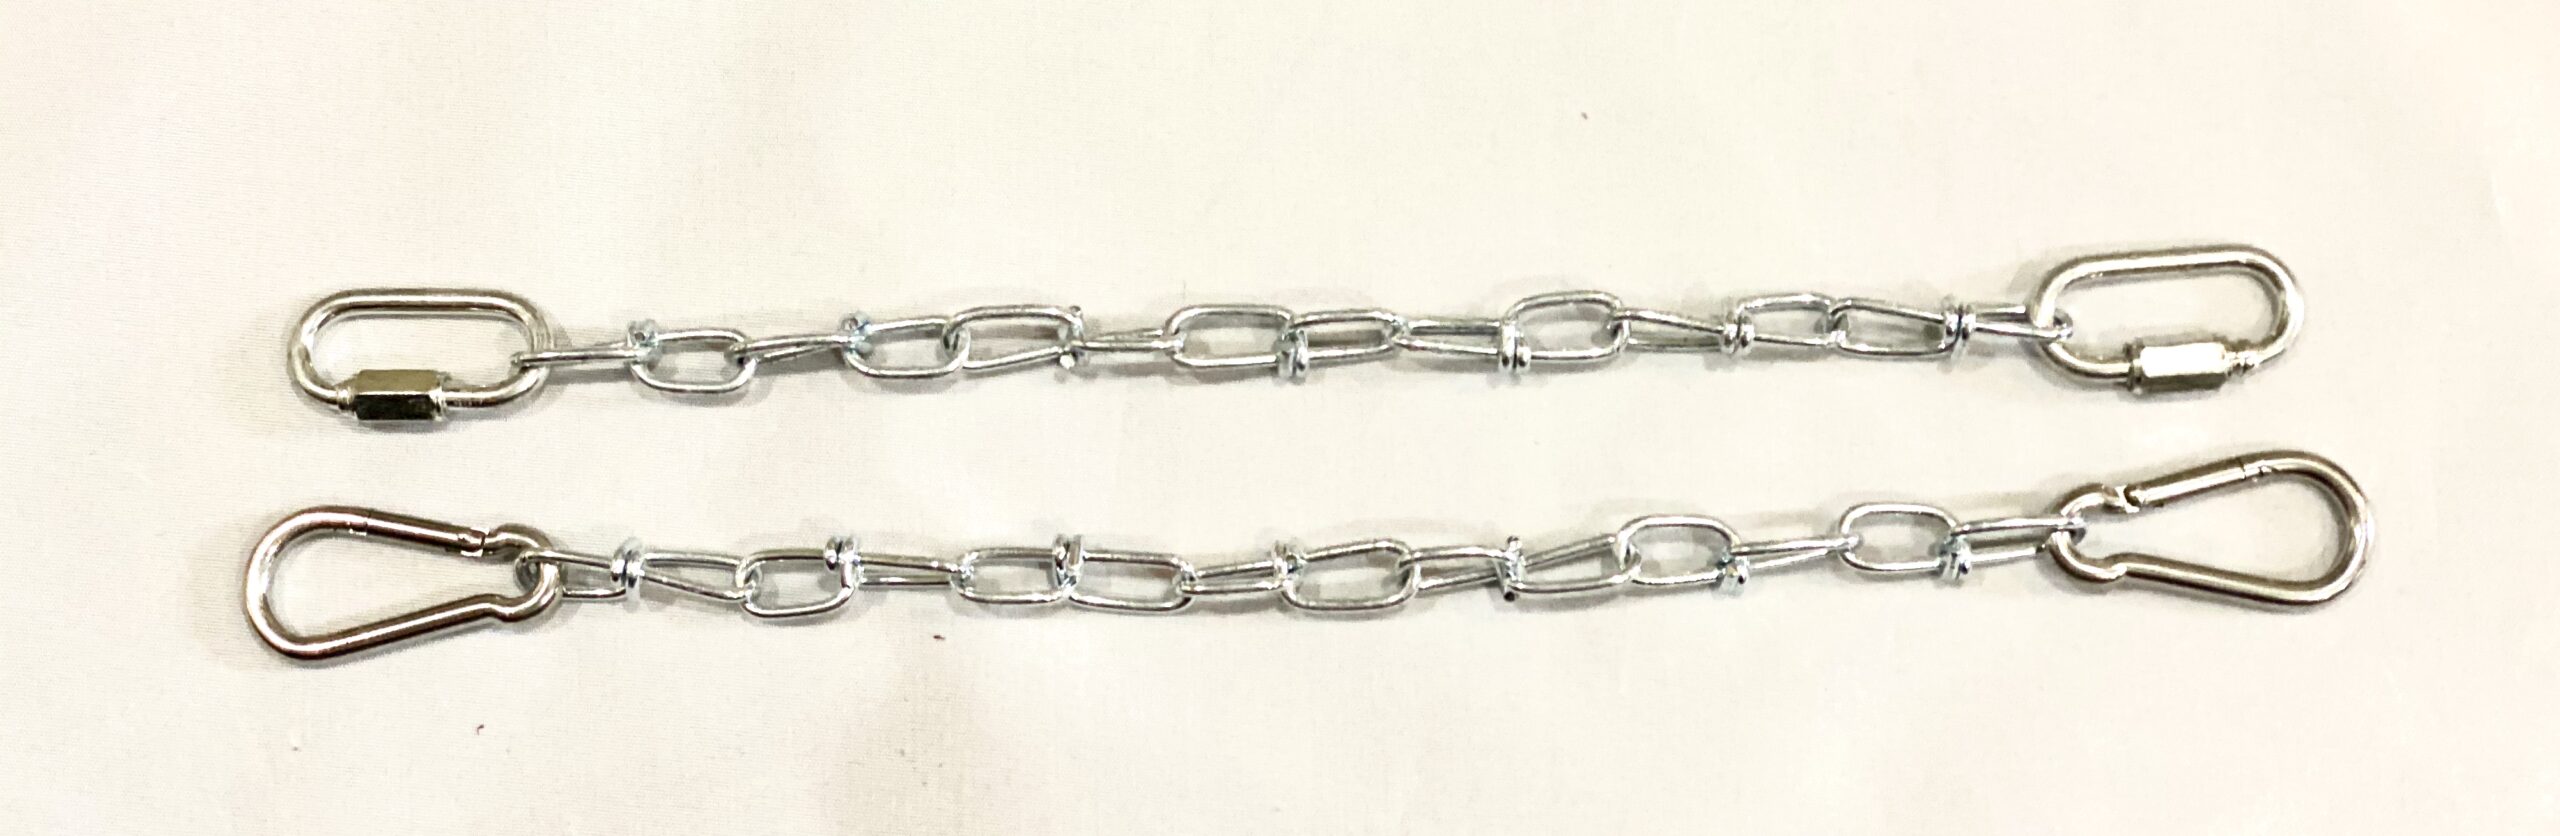 western tack Formay,metal curb chain 111823,quick link 108979zp 